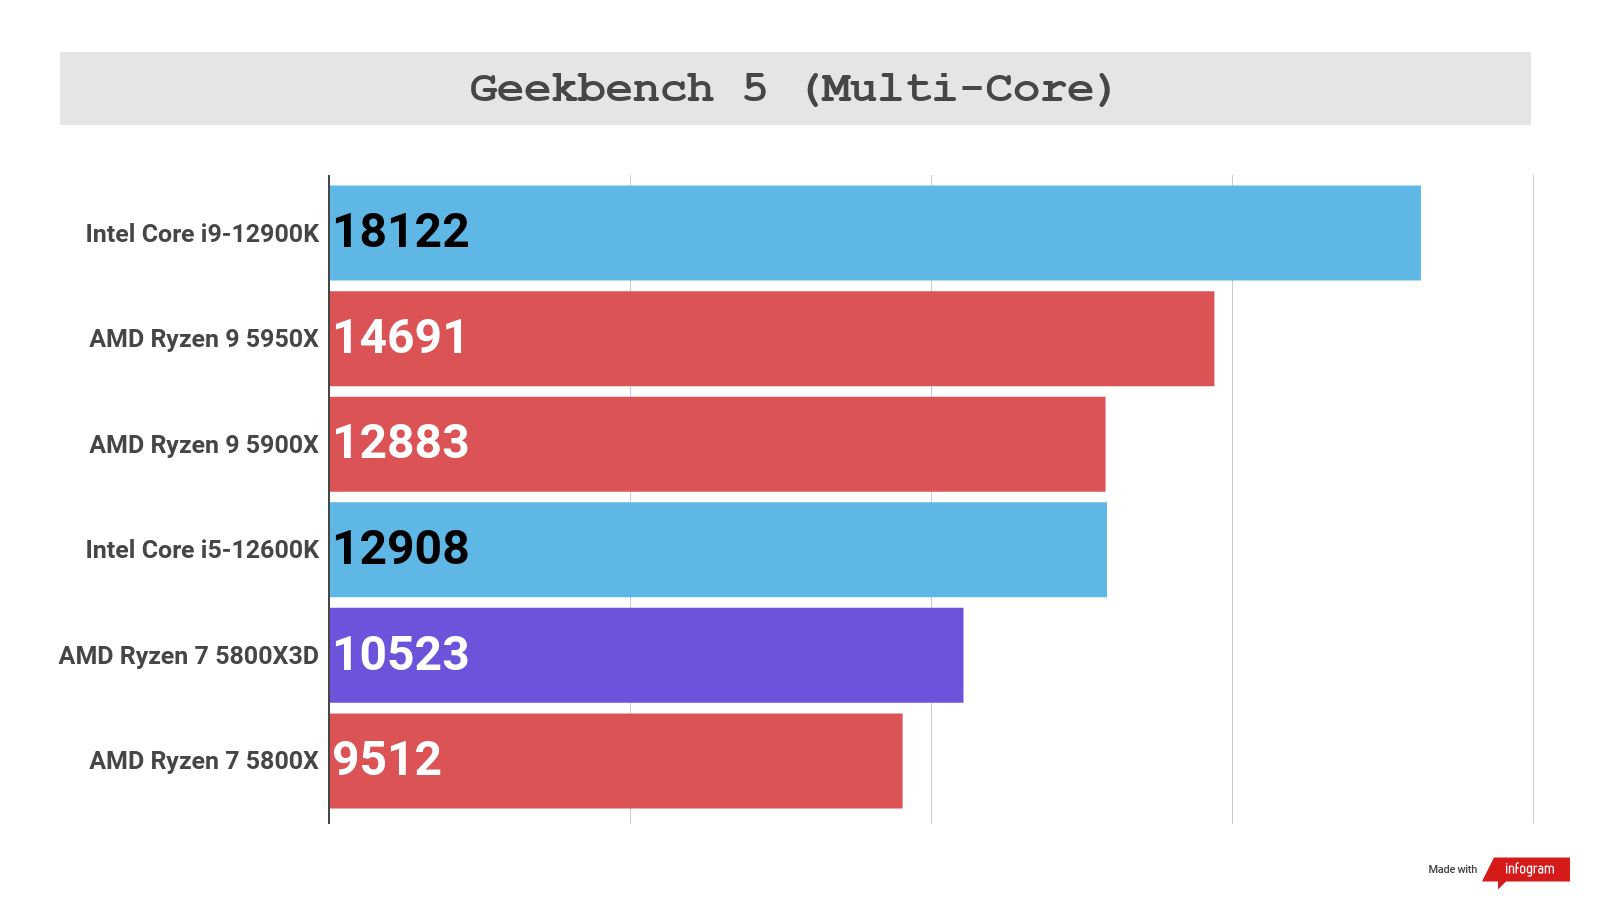 Bar graph showing poor performance for Ryzen 7 5800X3D in non-gaming benchmarks